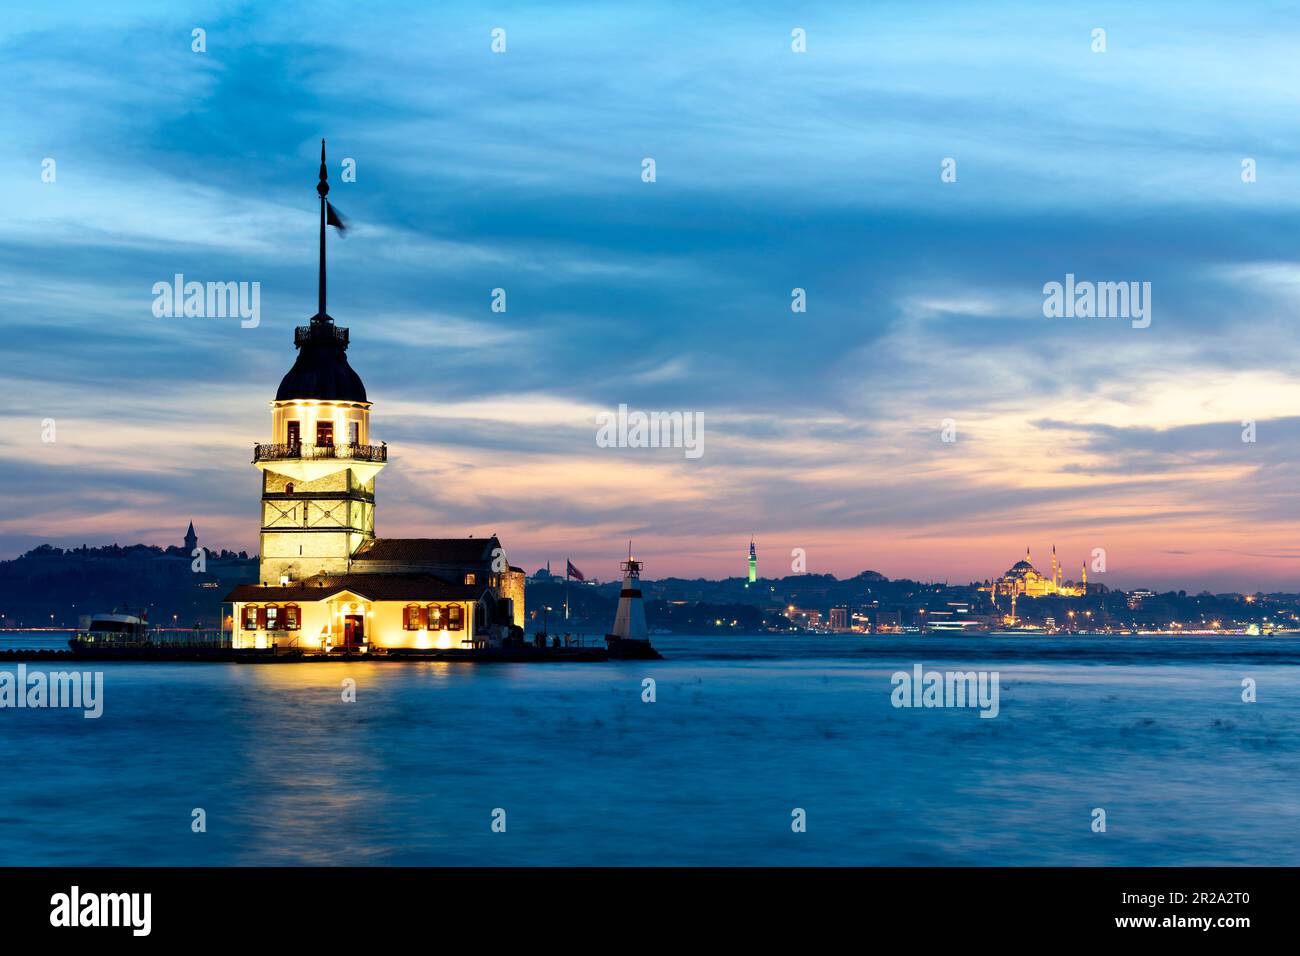 Istanbul Turkey. The Maiden's tower on the Bosphorus and the Süleymaniye Mosque at sunset Stock Photo